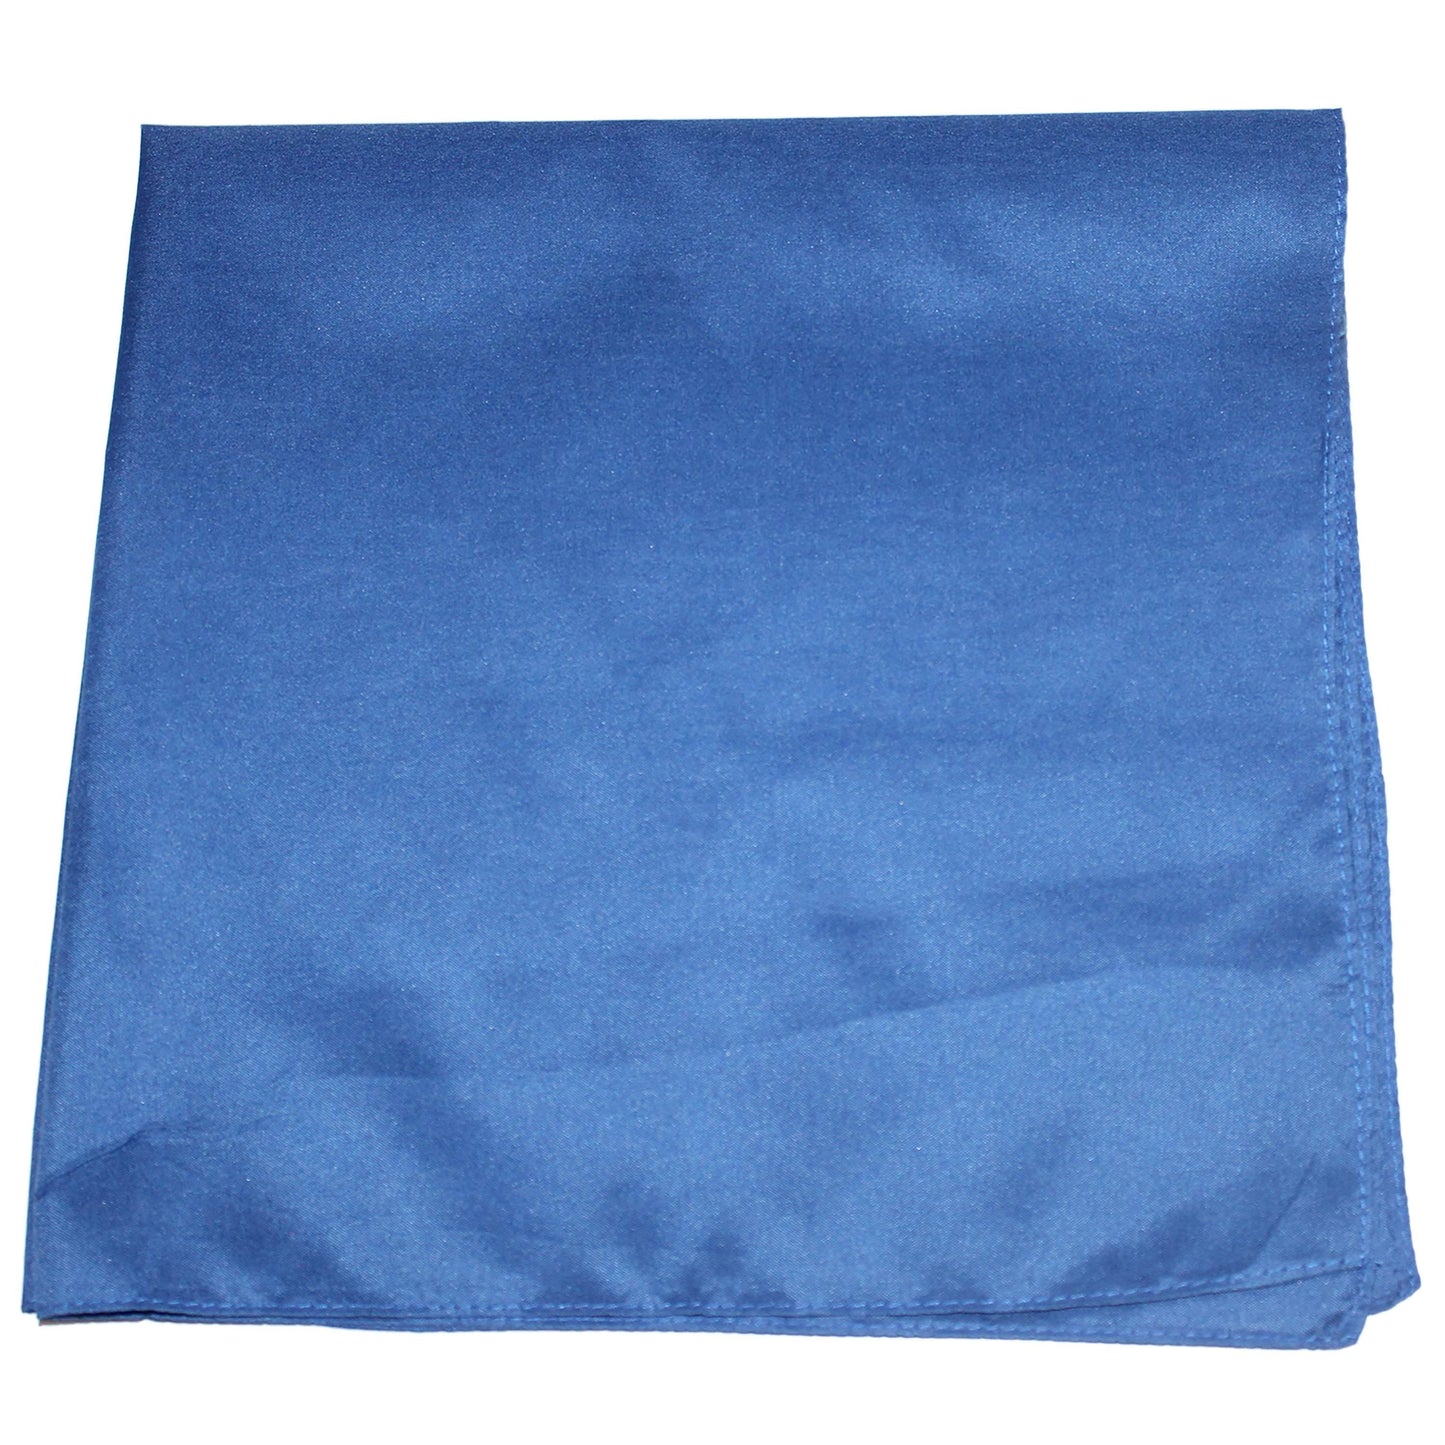 Mechaly Polyester XL Extra Large Solid Bandana - 27 x 27 Inches - 6 Pack